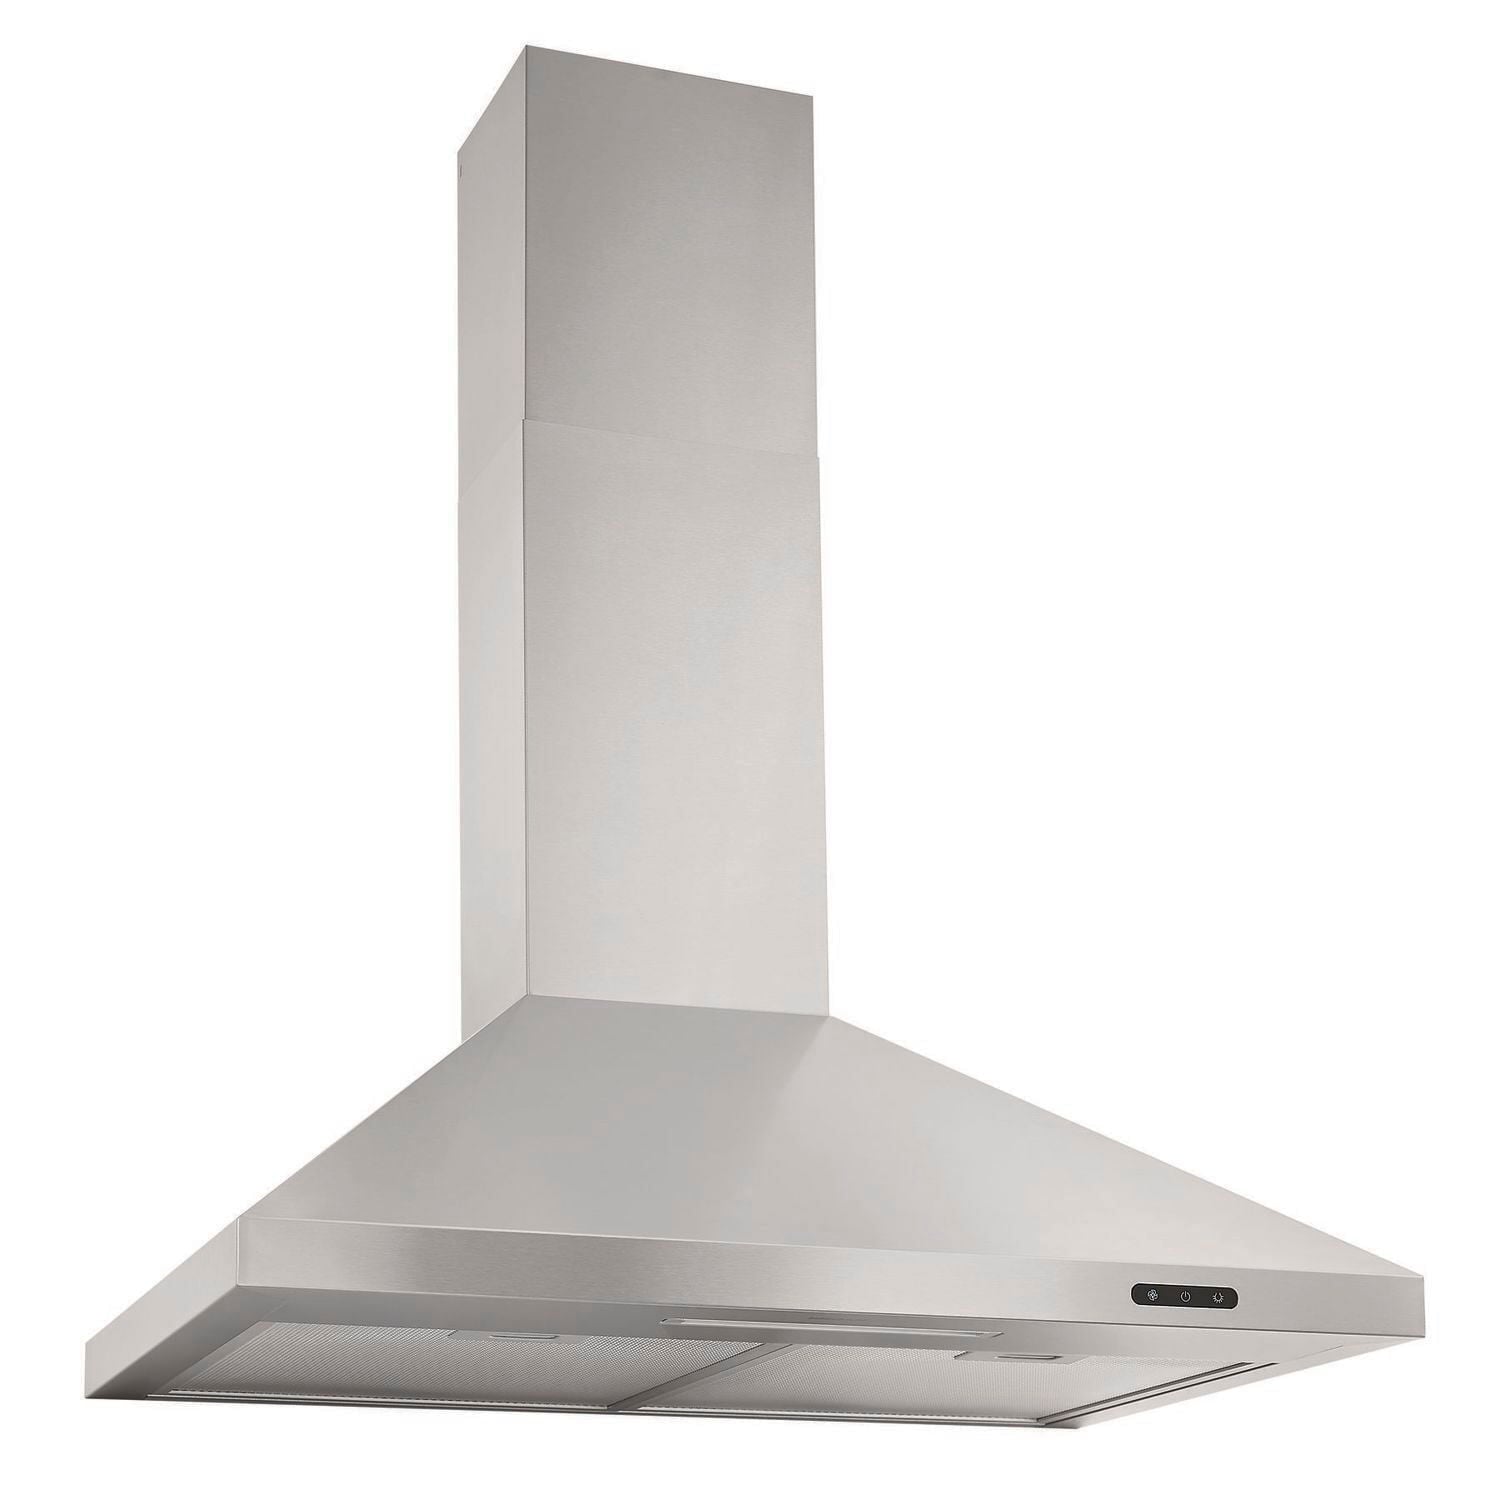 Verona's Guide to Kitchen Ventilation Systems